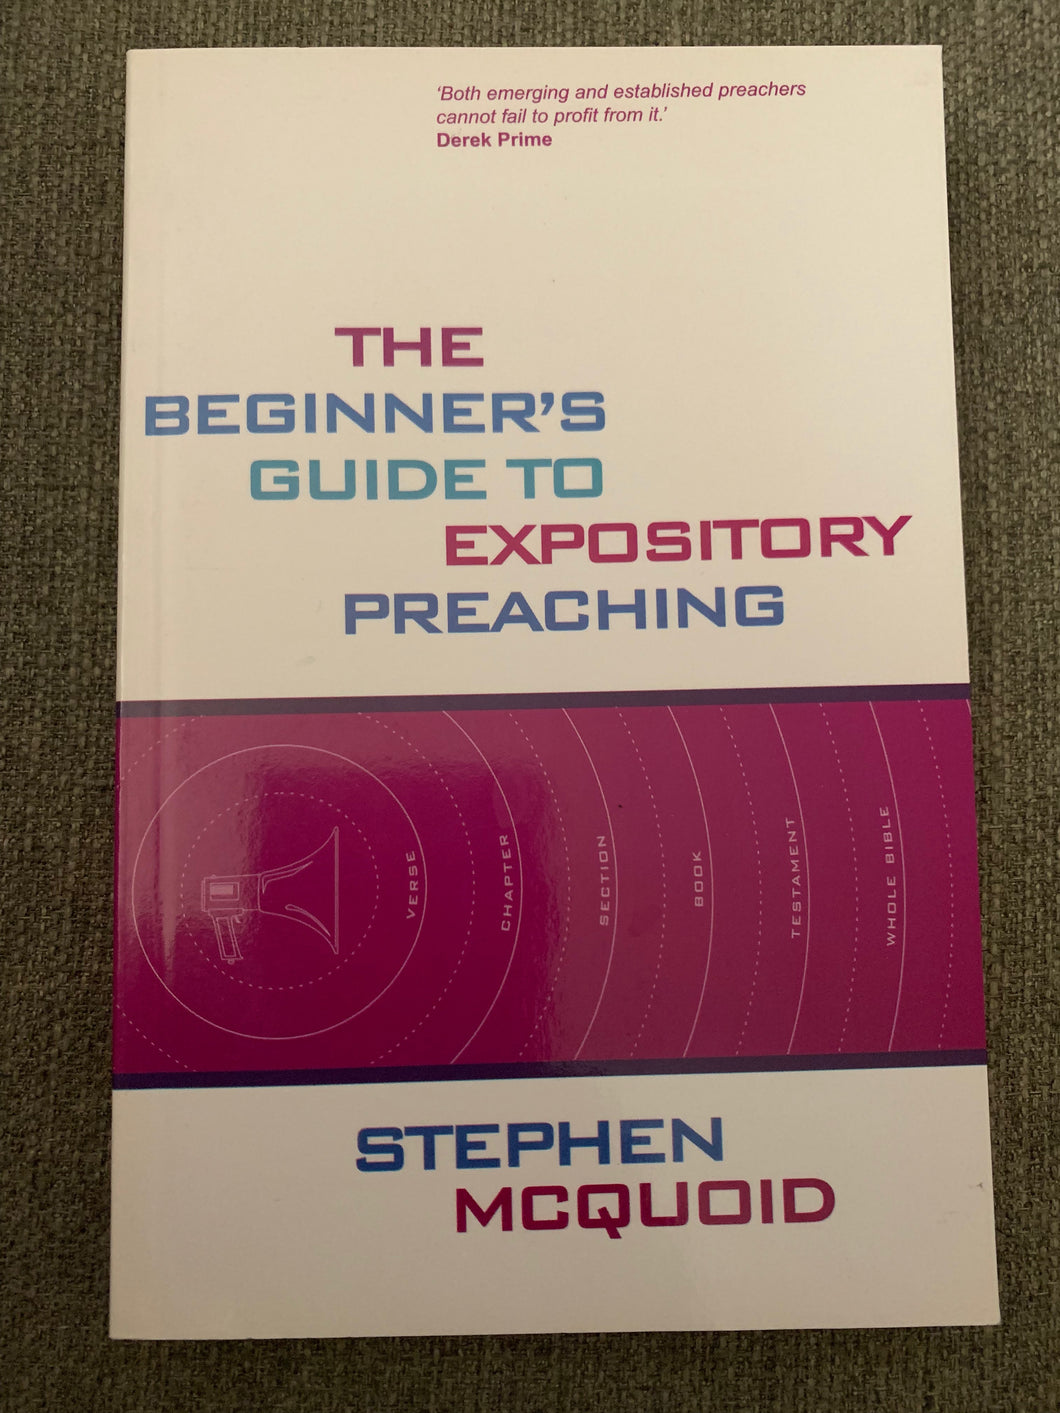 The Beginner's Guide to Expository Preaching by Stephen McQuoid